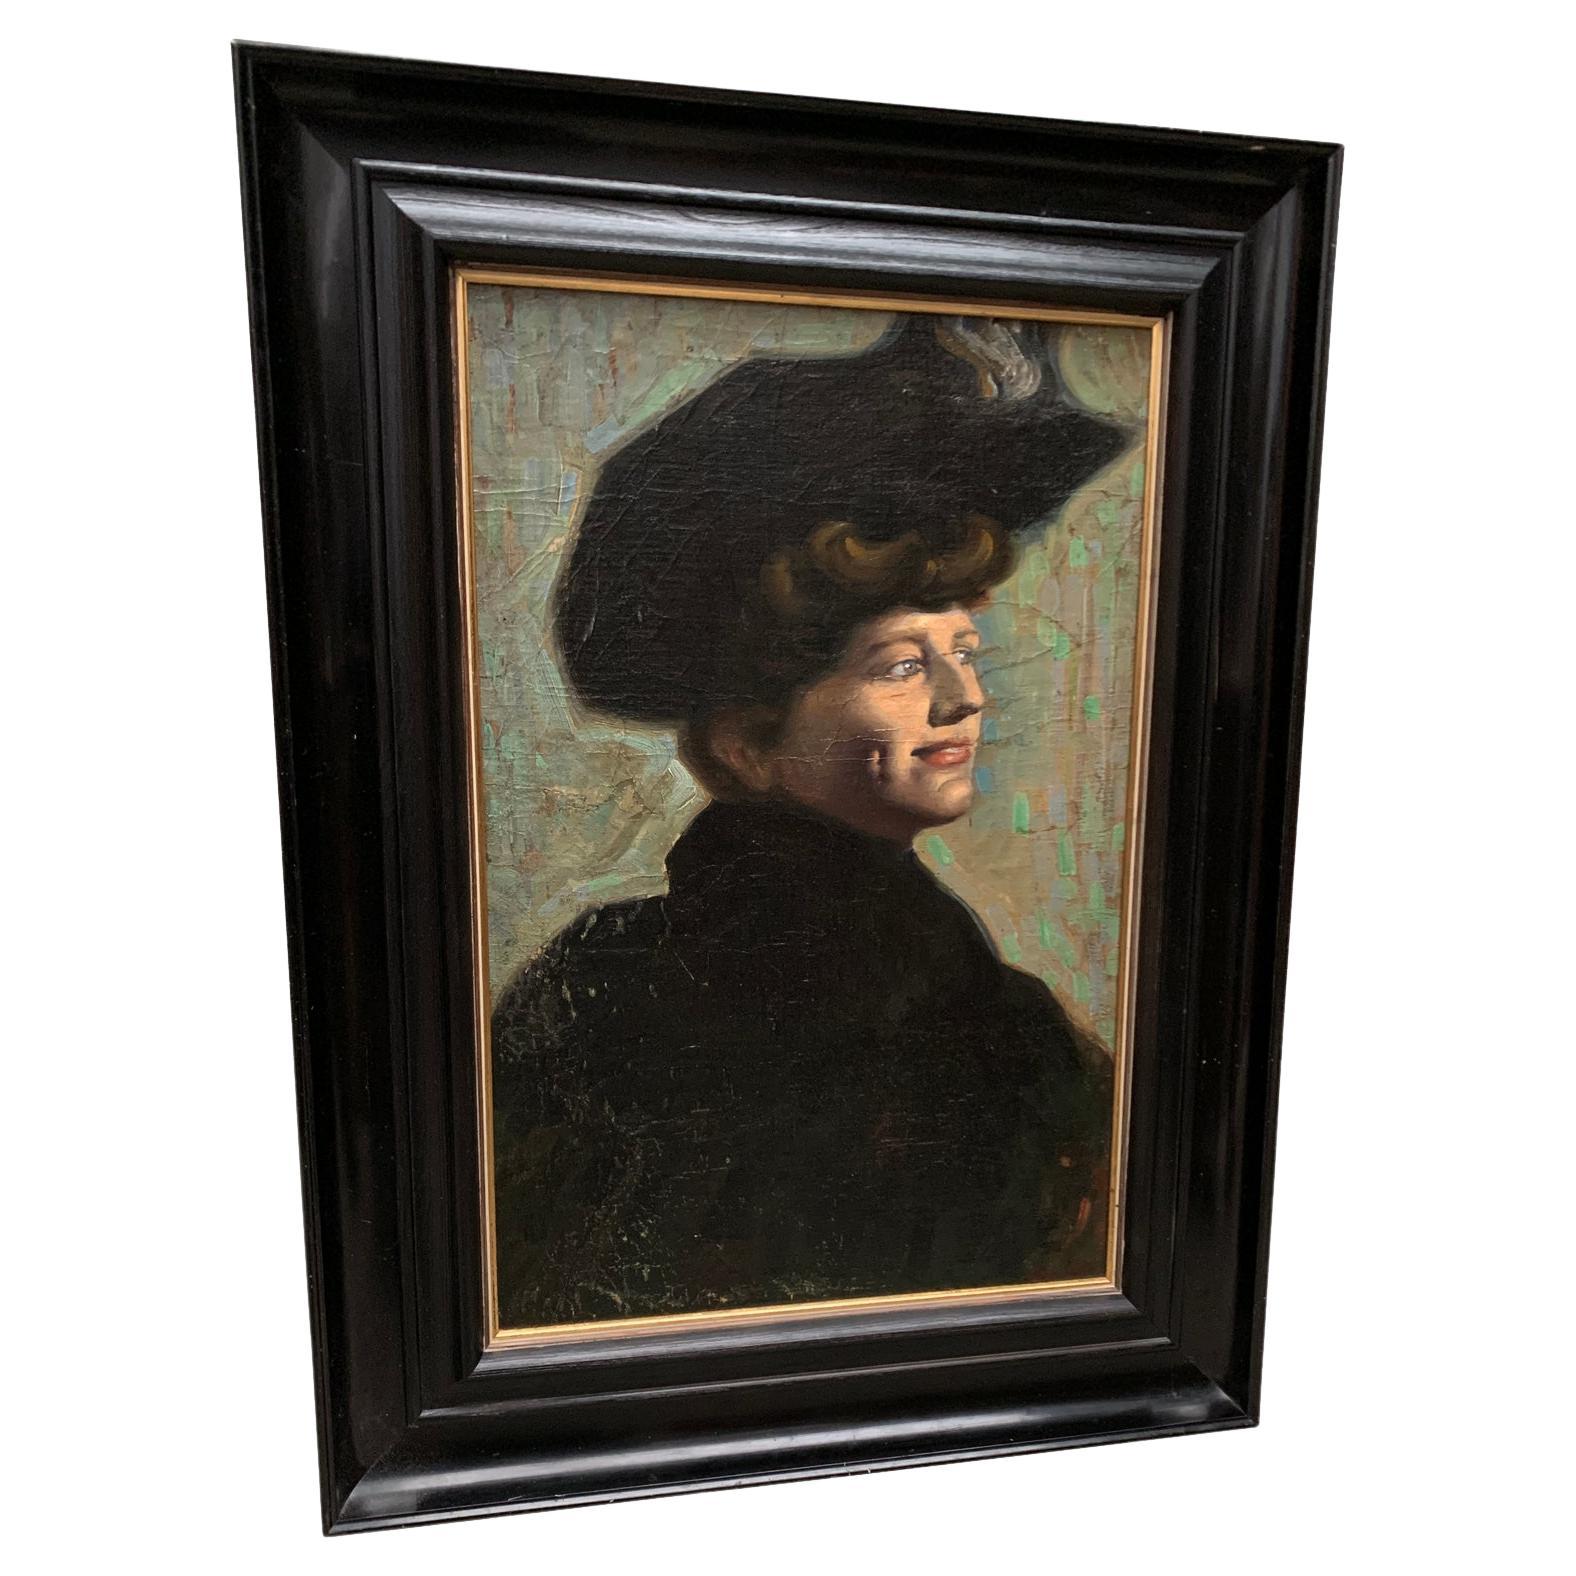 Impressionist portrait painting of a lady with a black hat and a happy smiling face from around 1890-1920. This Liberty style lady portrait in oil, is most likely painted by a French artist in the typical manners of the end of the 19th Century on a